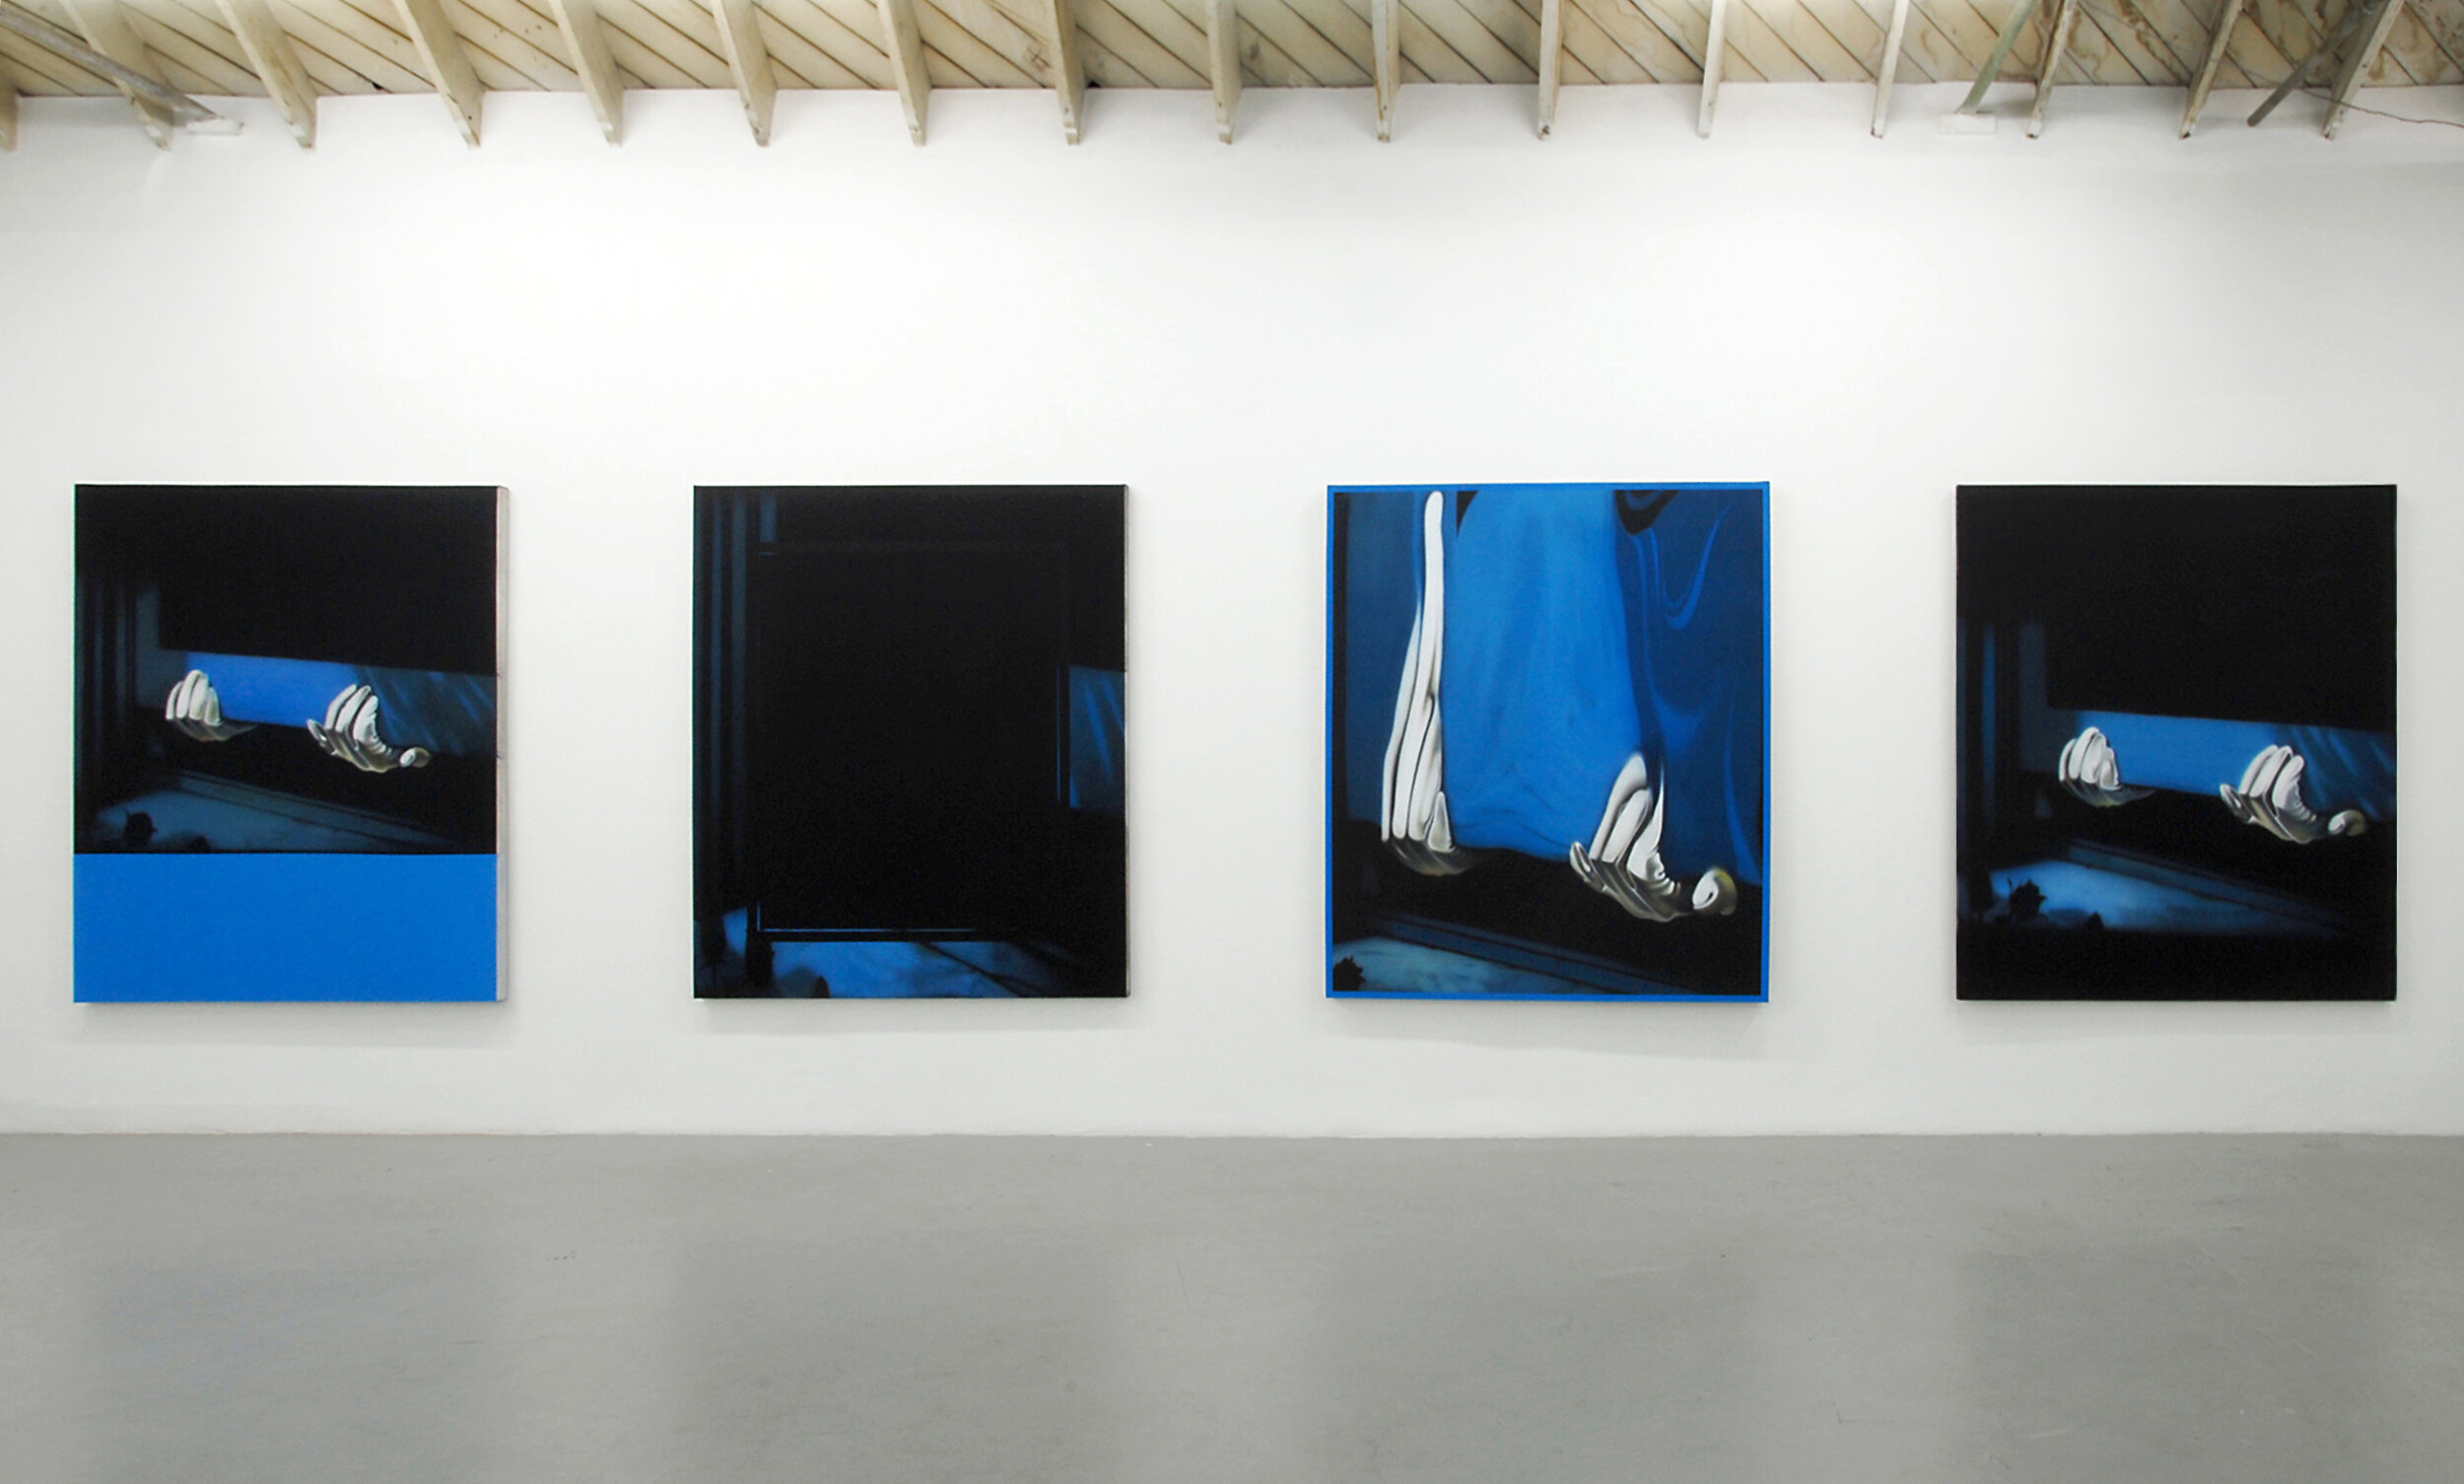   1, 2, 3, 4 Thiefs (Part 1-4),  2011. Acrylic on canvas. 72 x 62 inches 